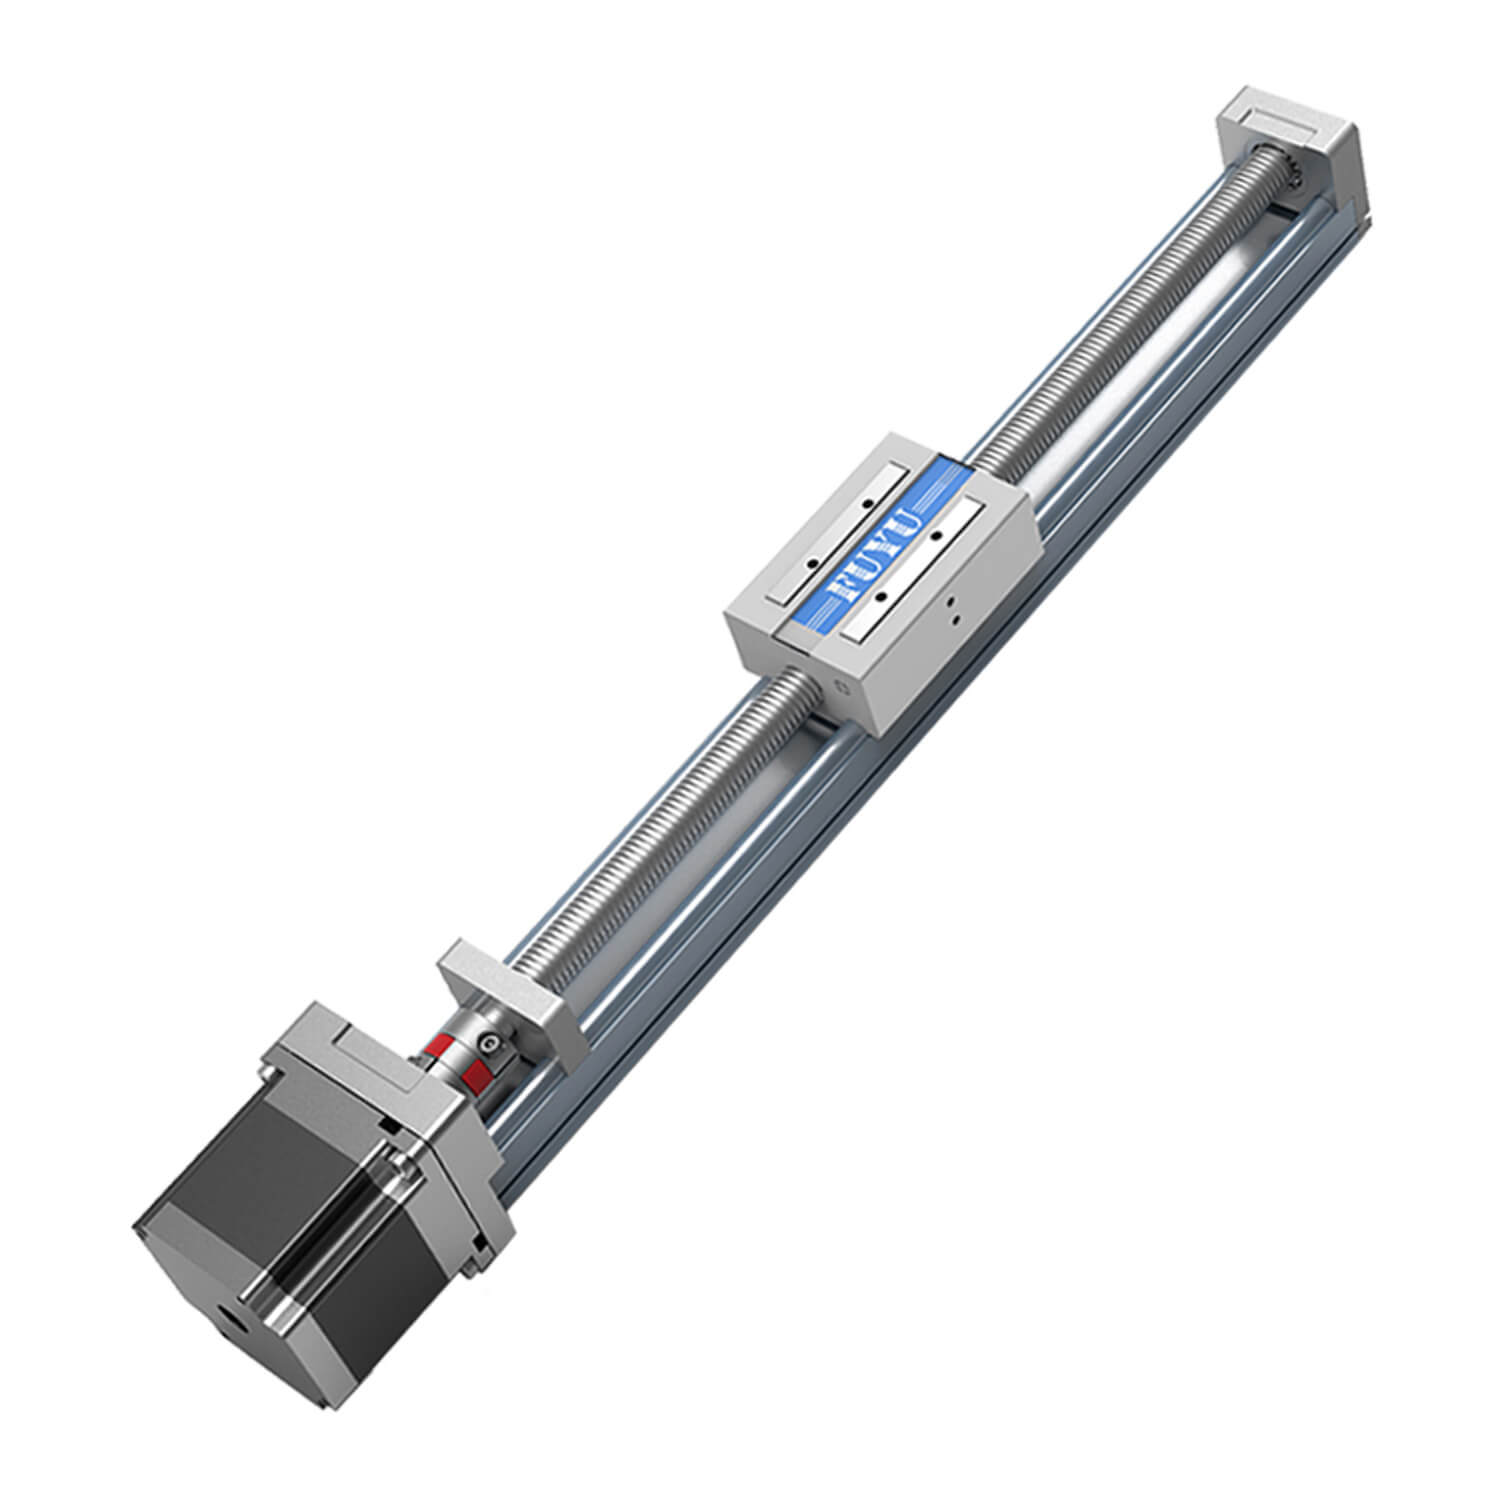 Mute Design Compact Structure Ball Screw Motorized Linear Guide Support Flip Load Featured Image